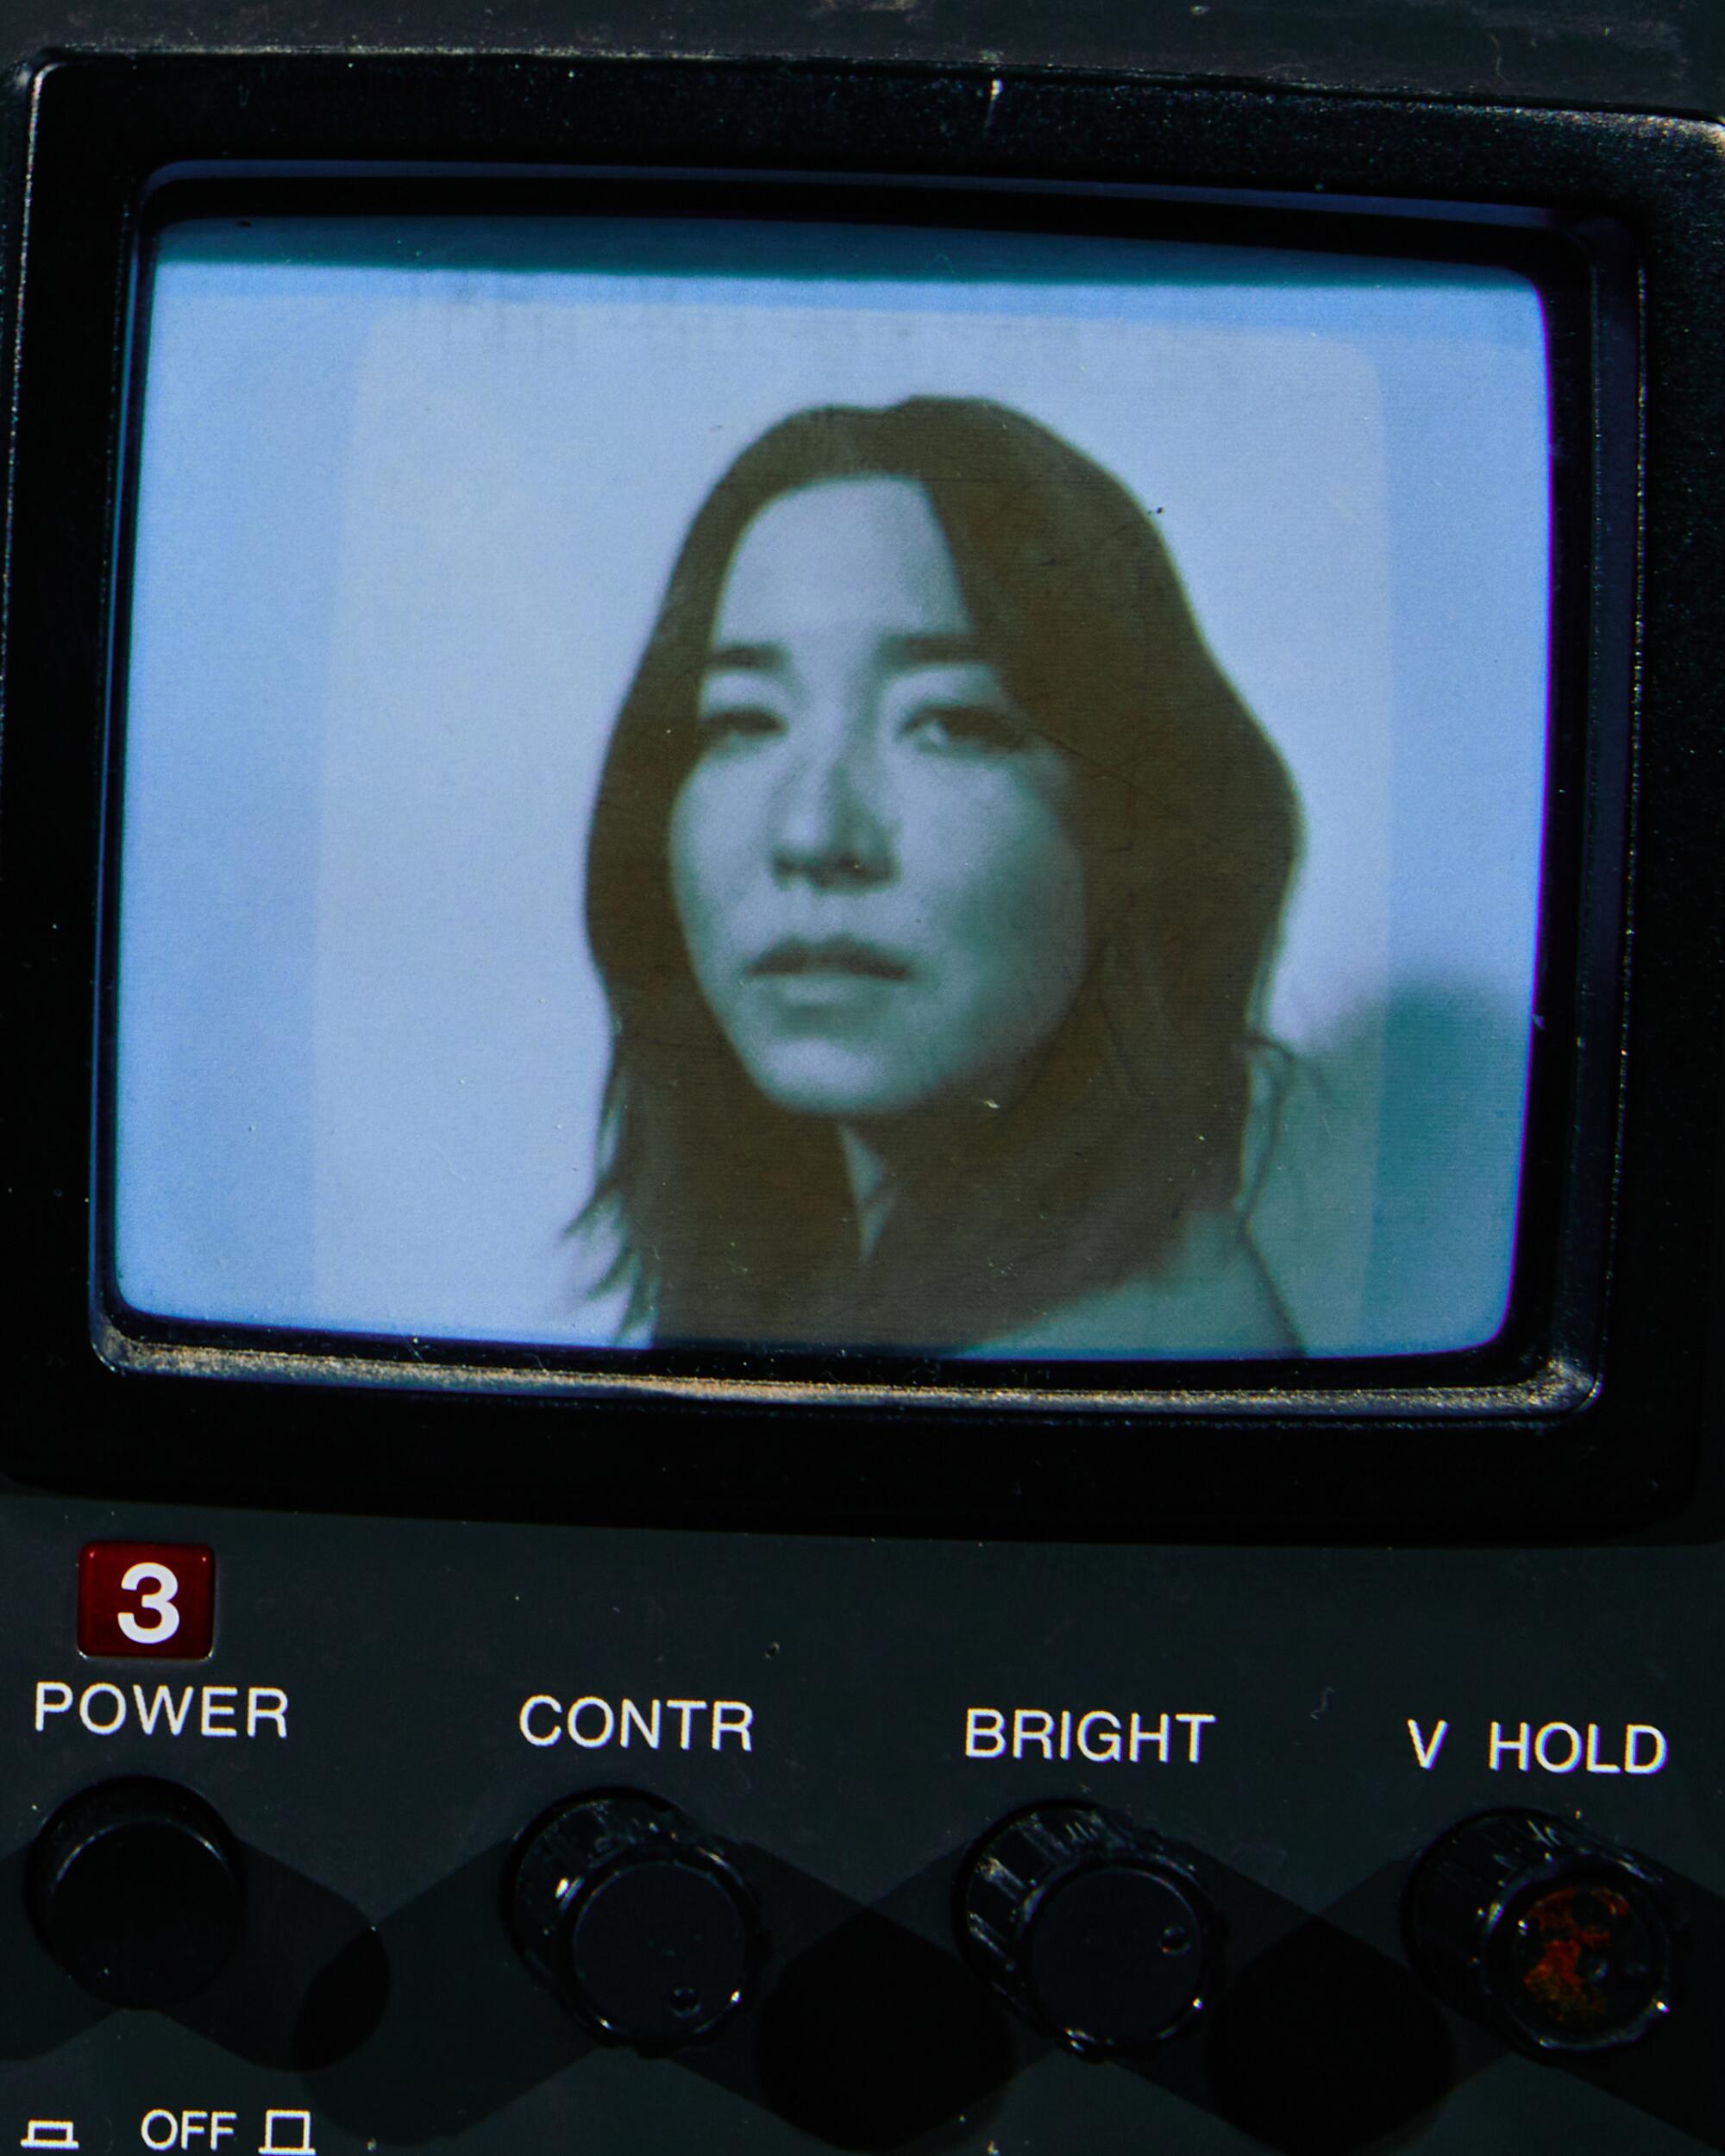 A woman on a television screen.